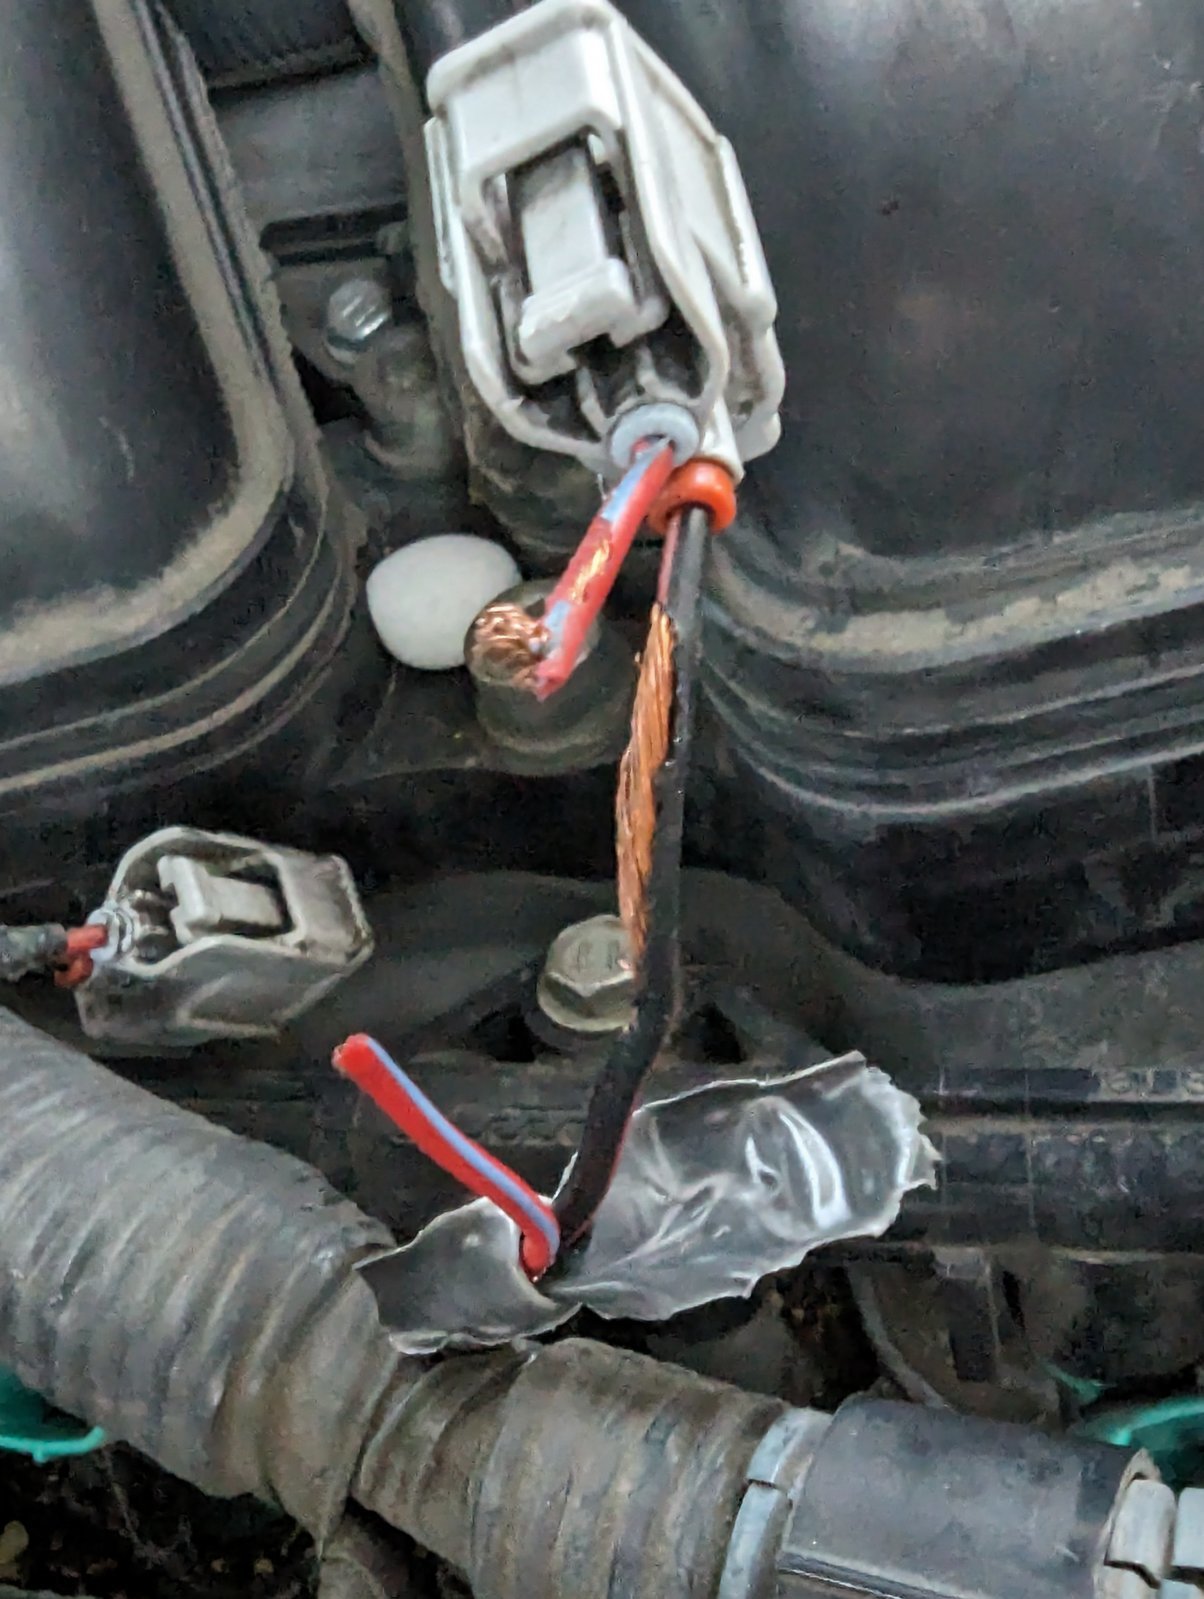 chewed-off injector wires.jpg